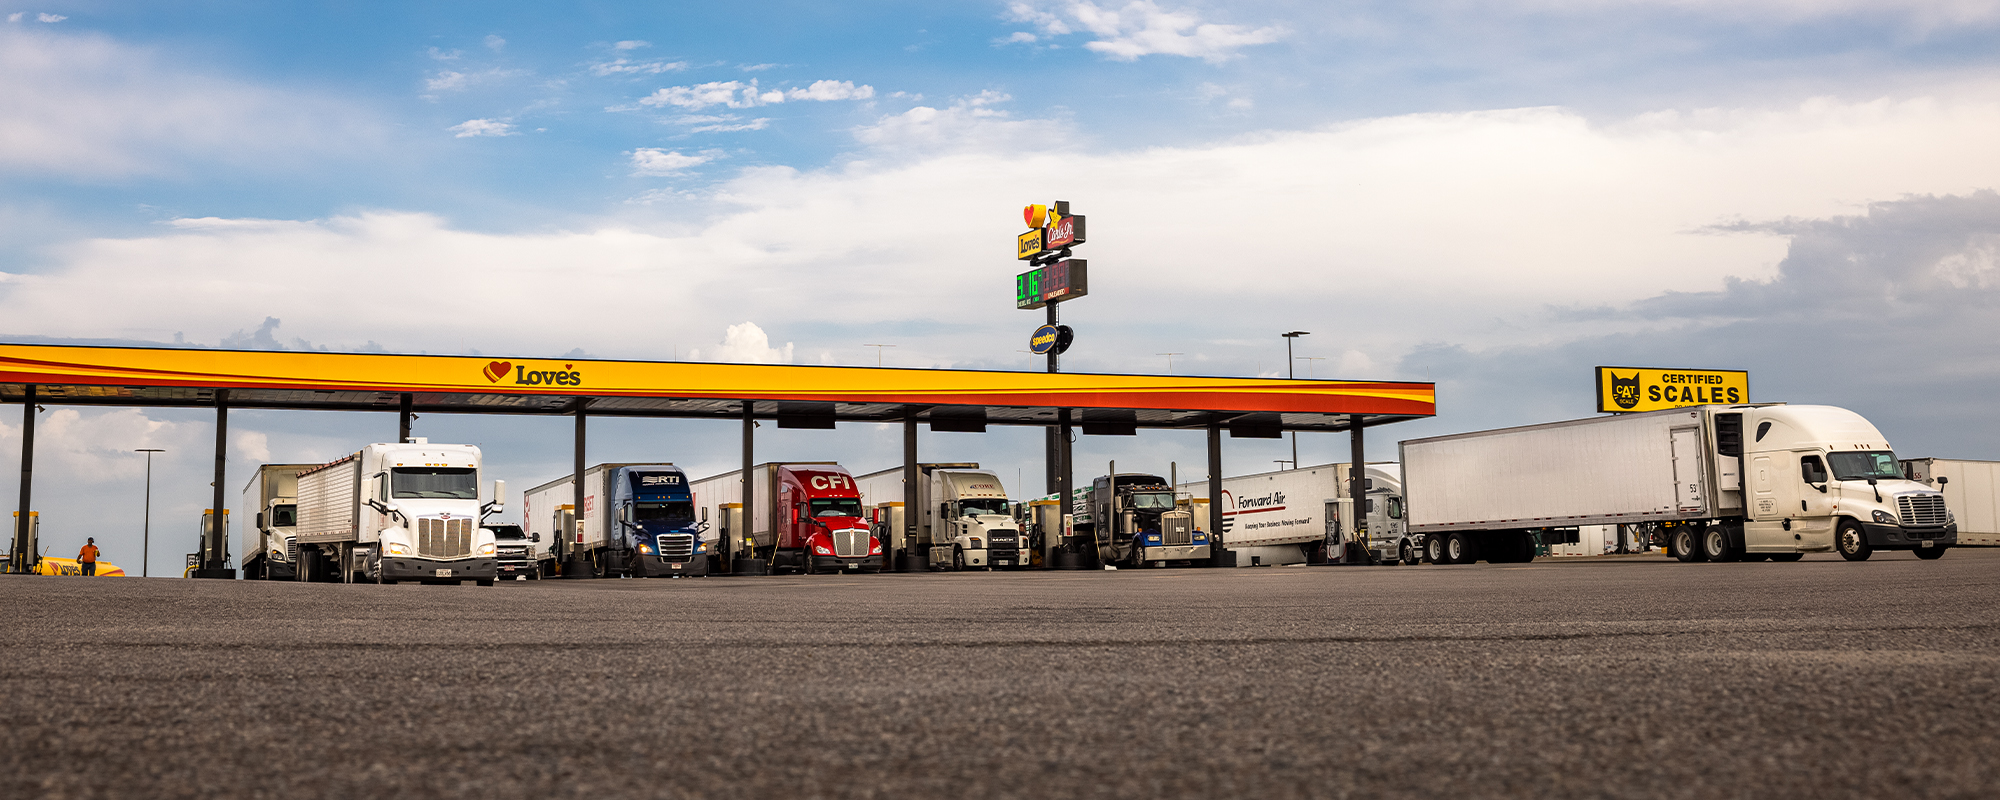 commercial trucks fueling at Love's Travel Stops during daytime at diesel bays